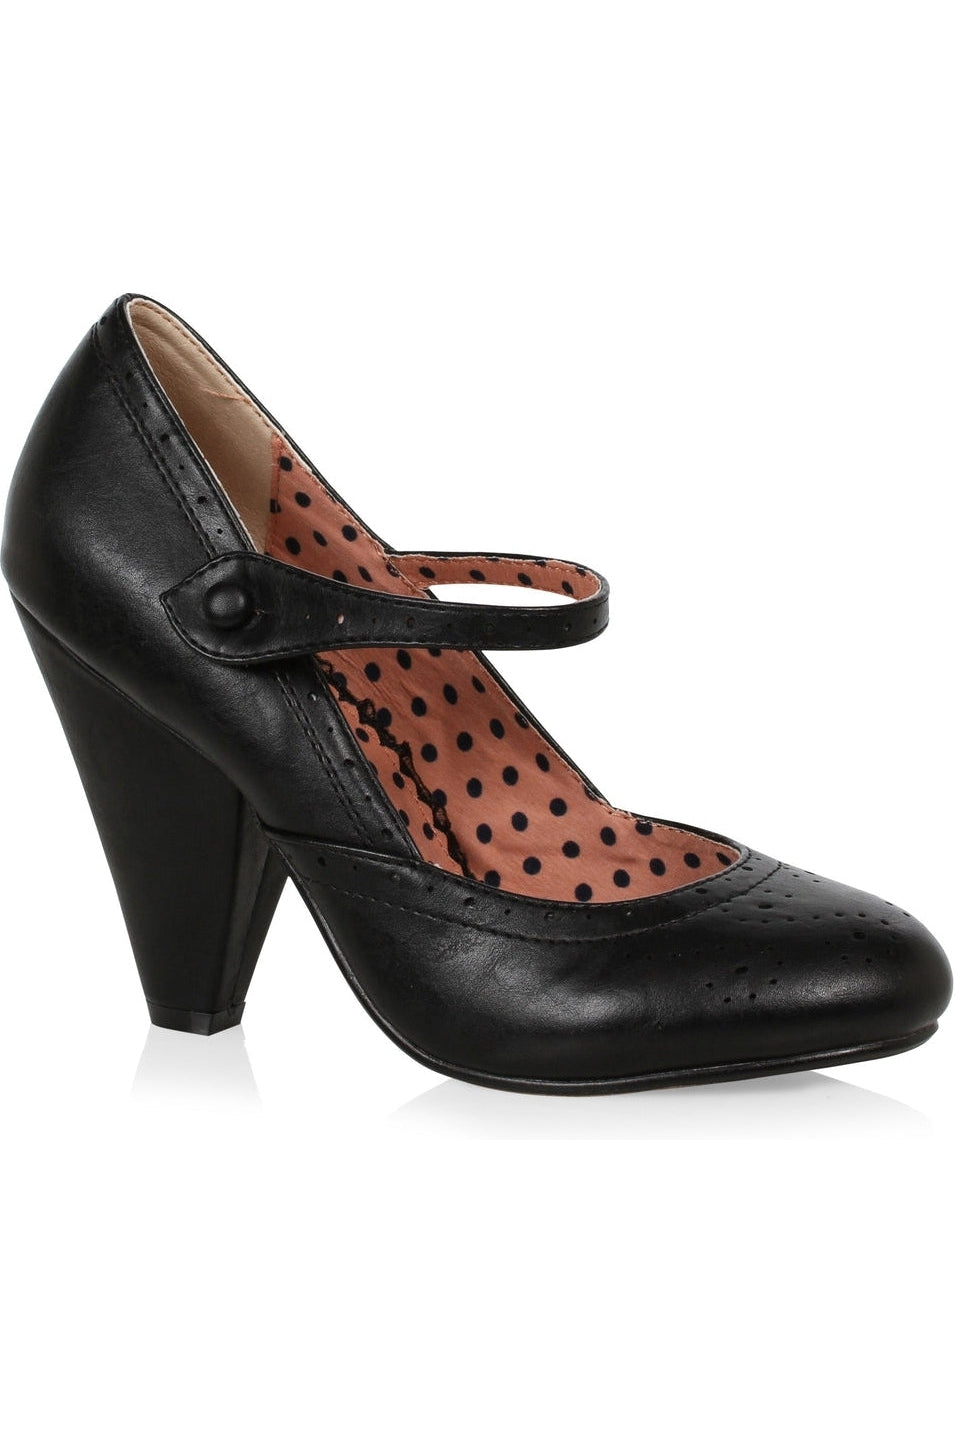 Bettie Page Elanor Mary Jane | Black Faux Leather-Mary Janes-Bettie Page by Ellie-SEXYSHOES.COM